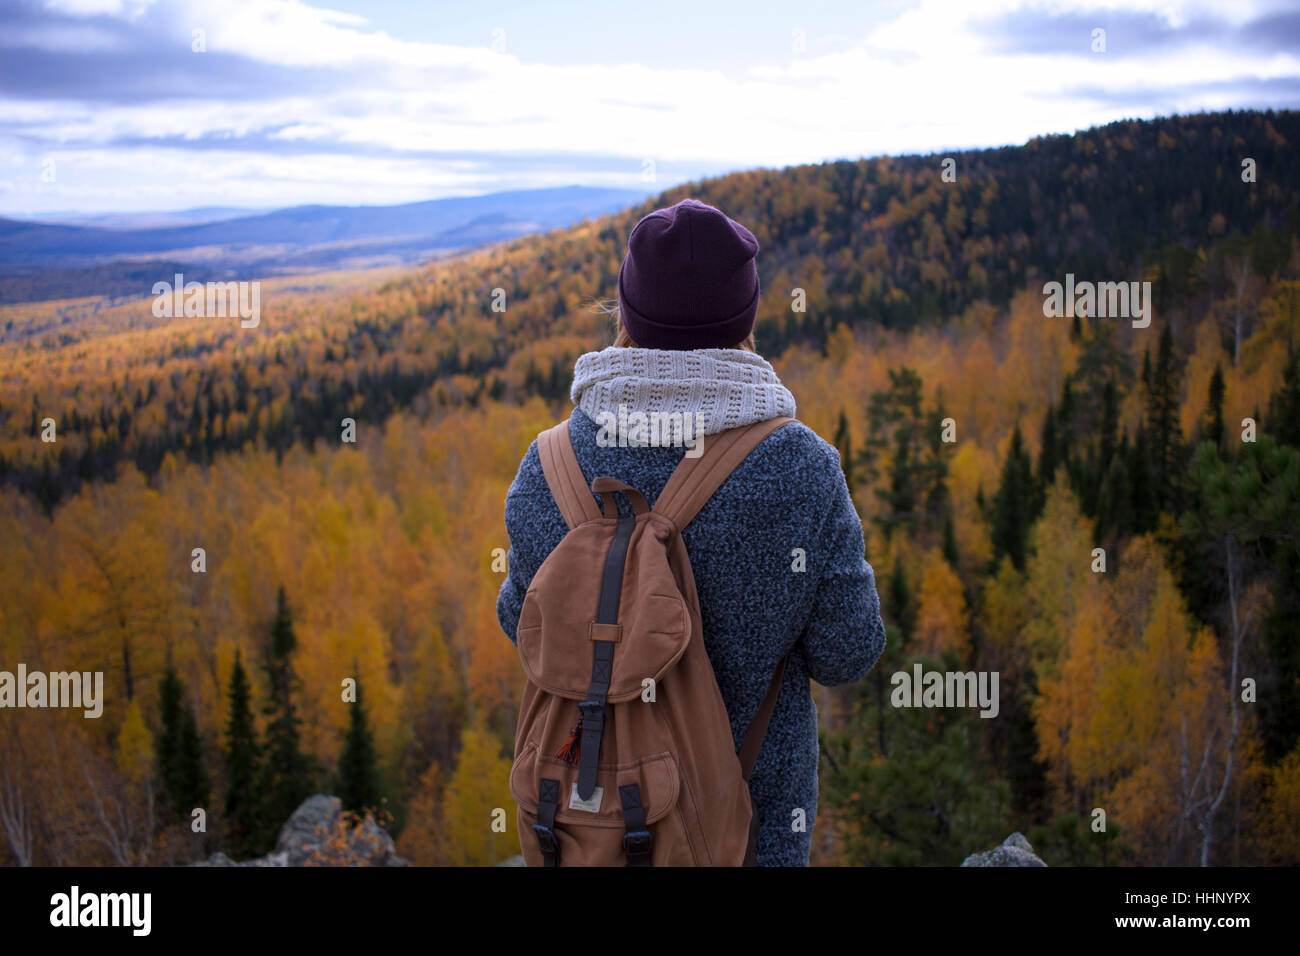 Caucasian woman backpacking in autumn landscape Stock Photo